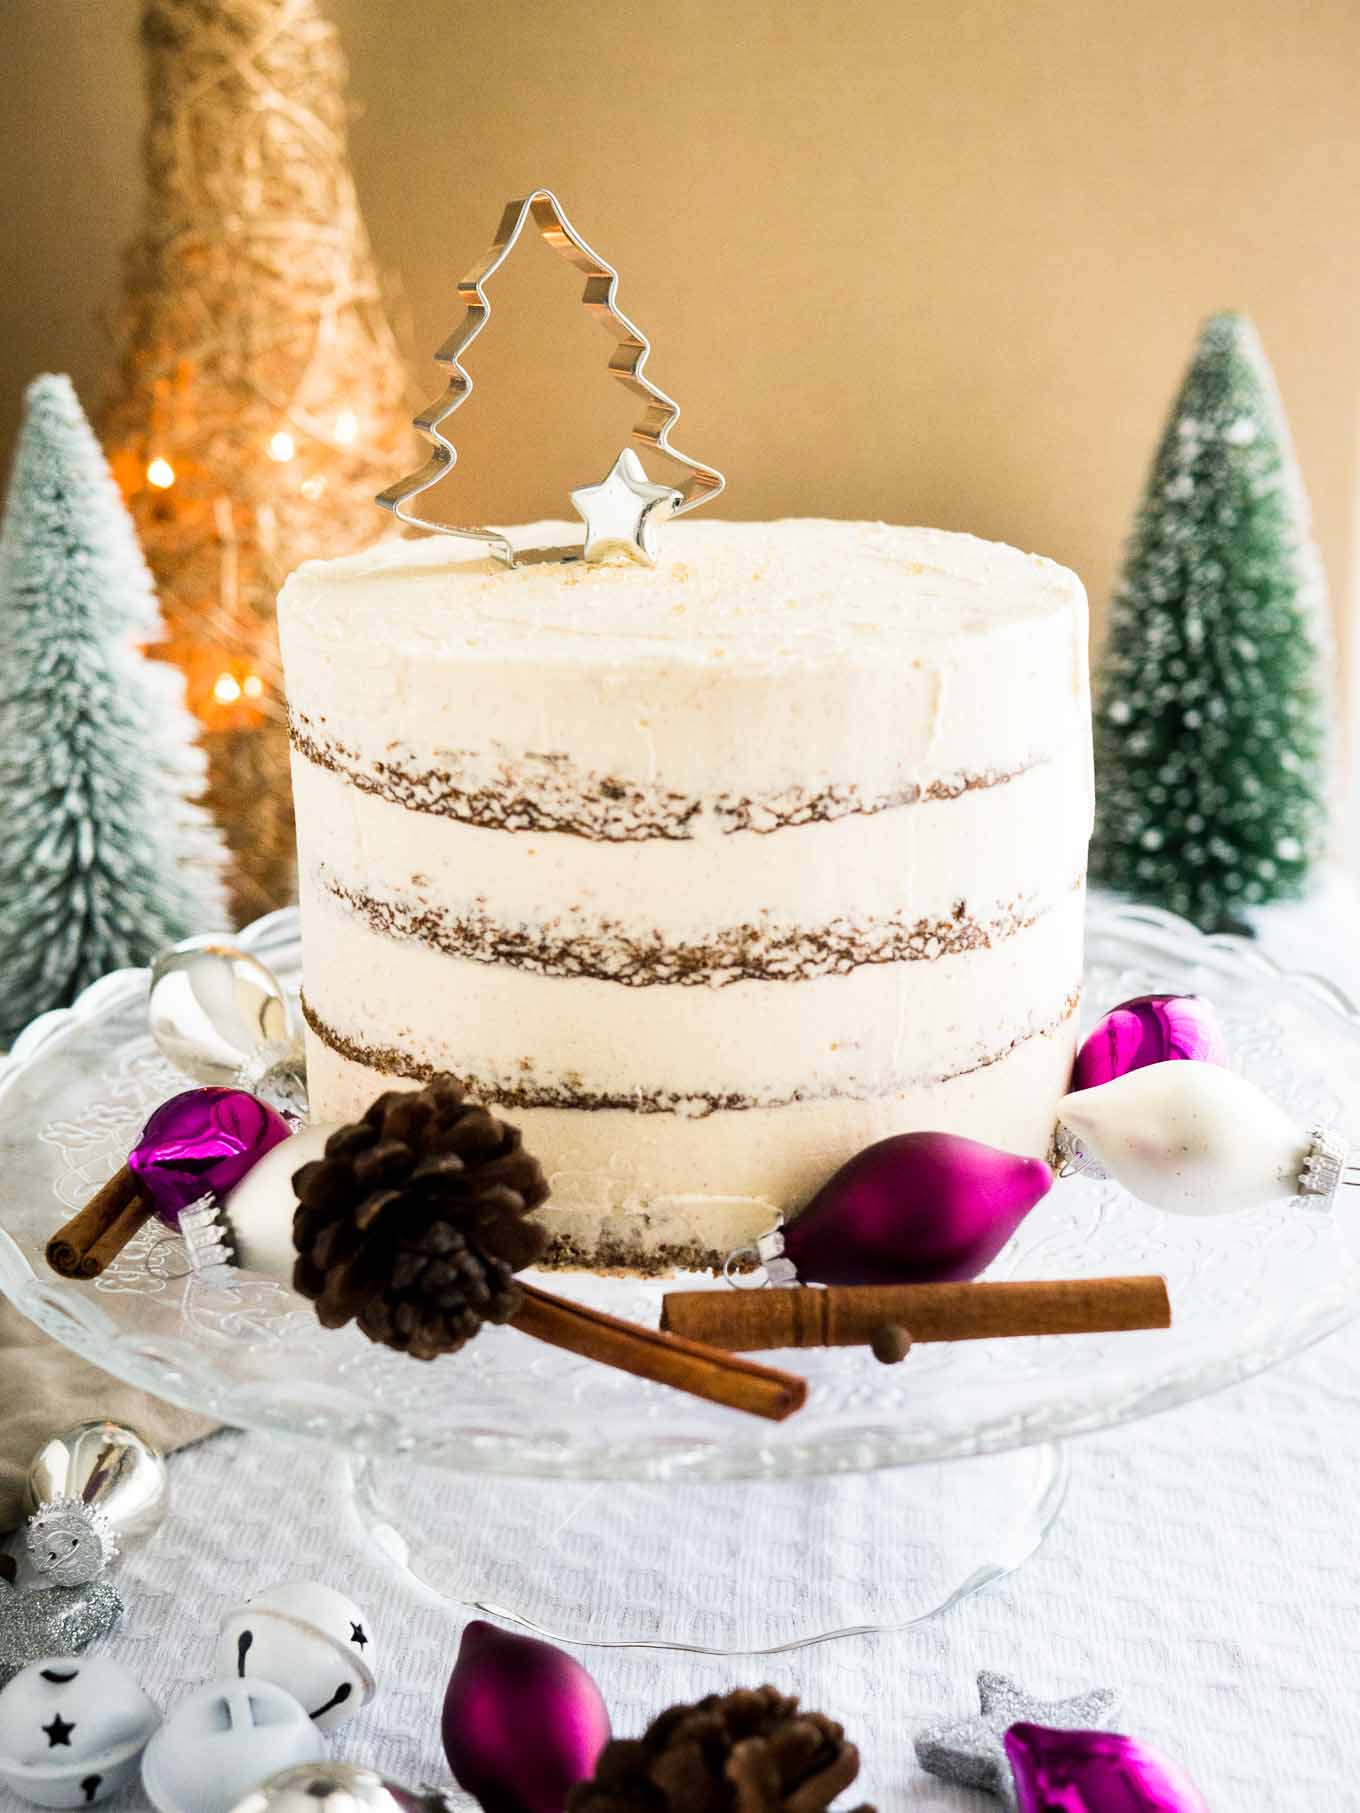 Easy Gingerbread Cake Recipe with Baileys Cream Cheese Frosting